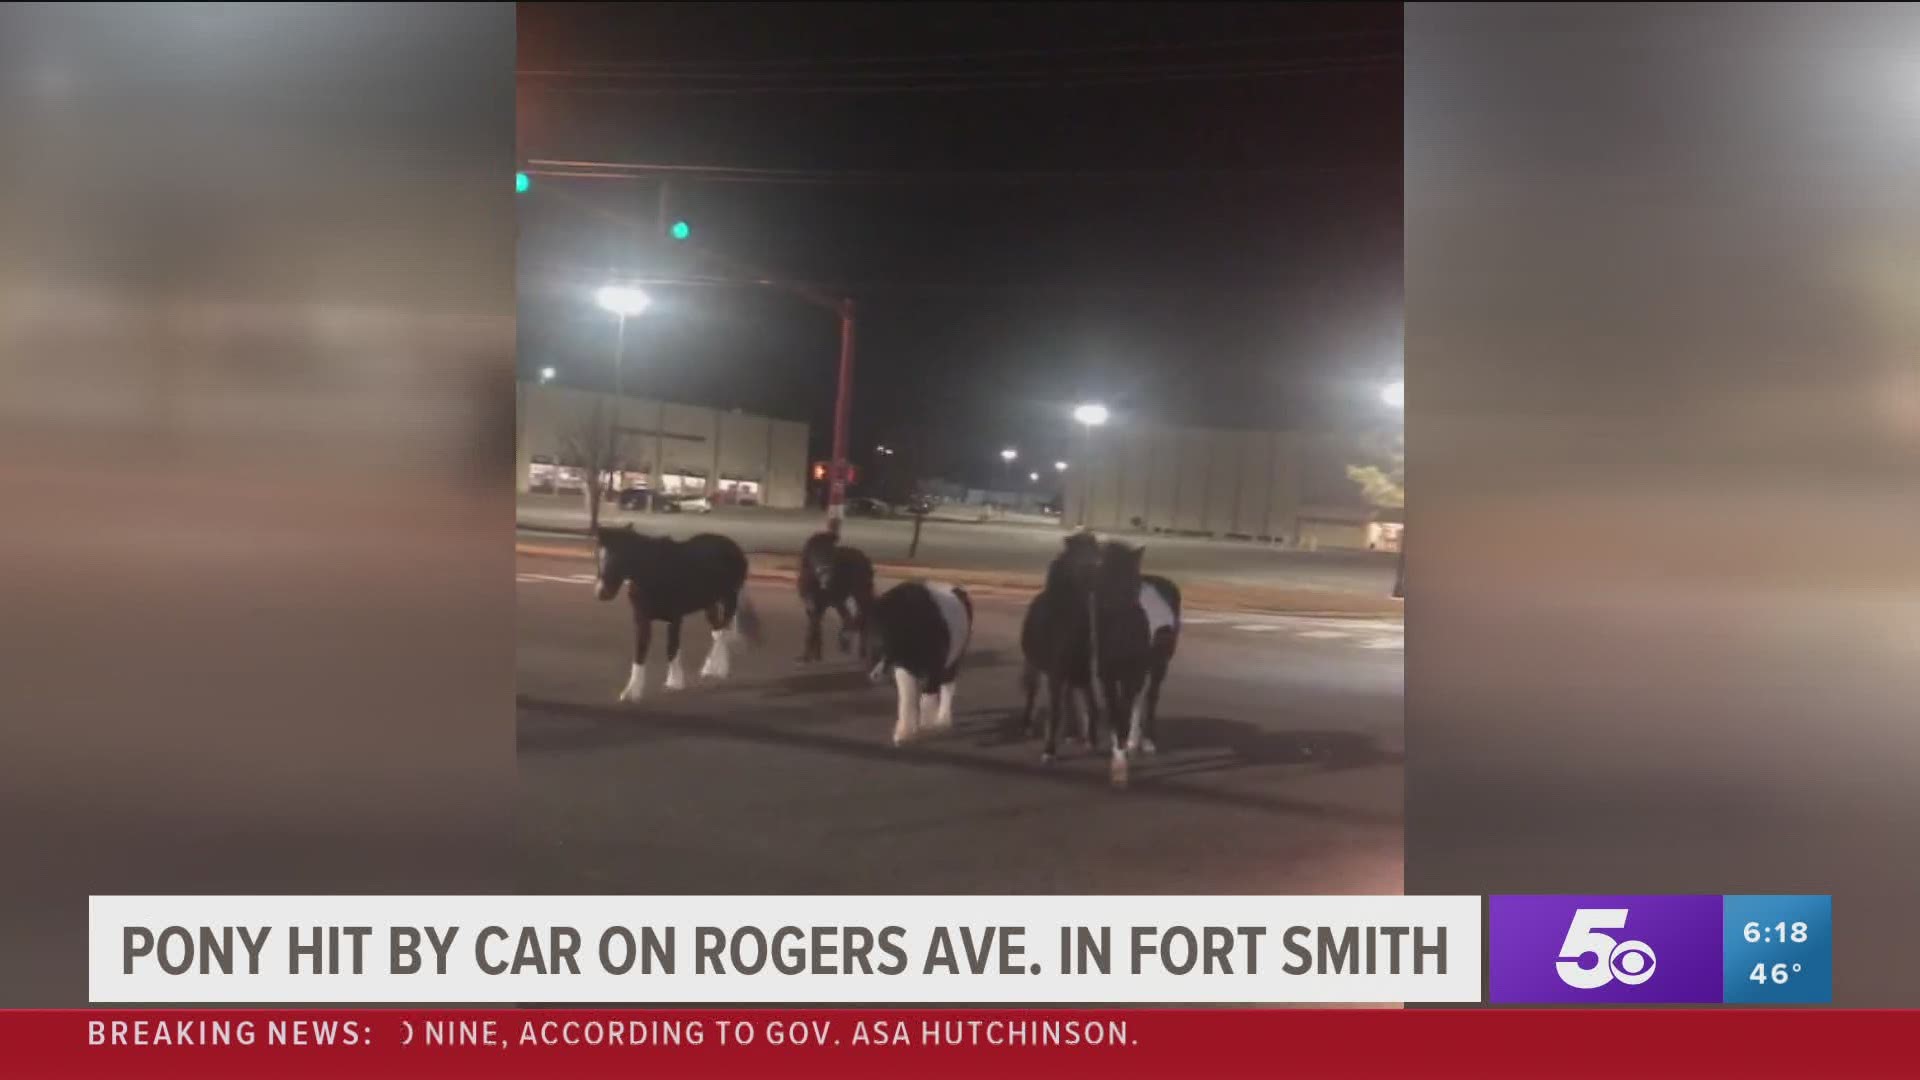 Pony hit by car on Rogers Ave in Fort Smith